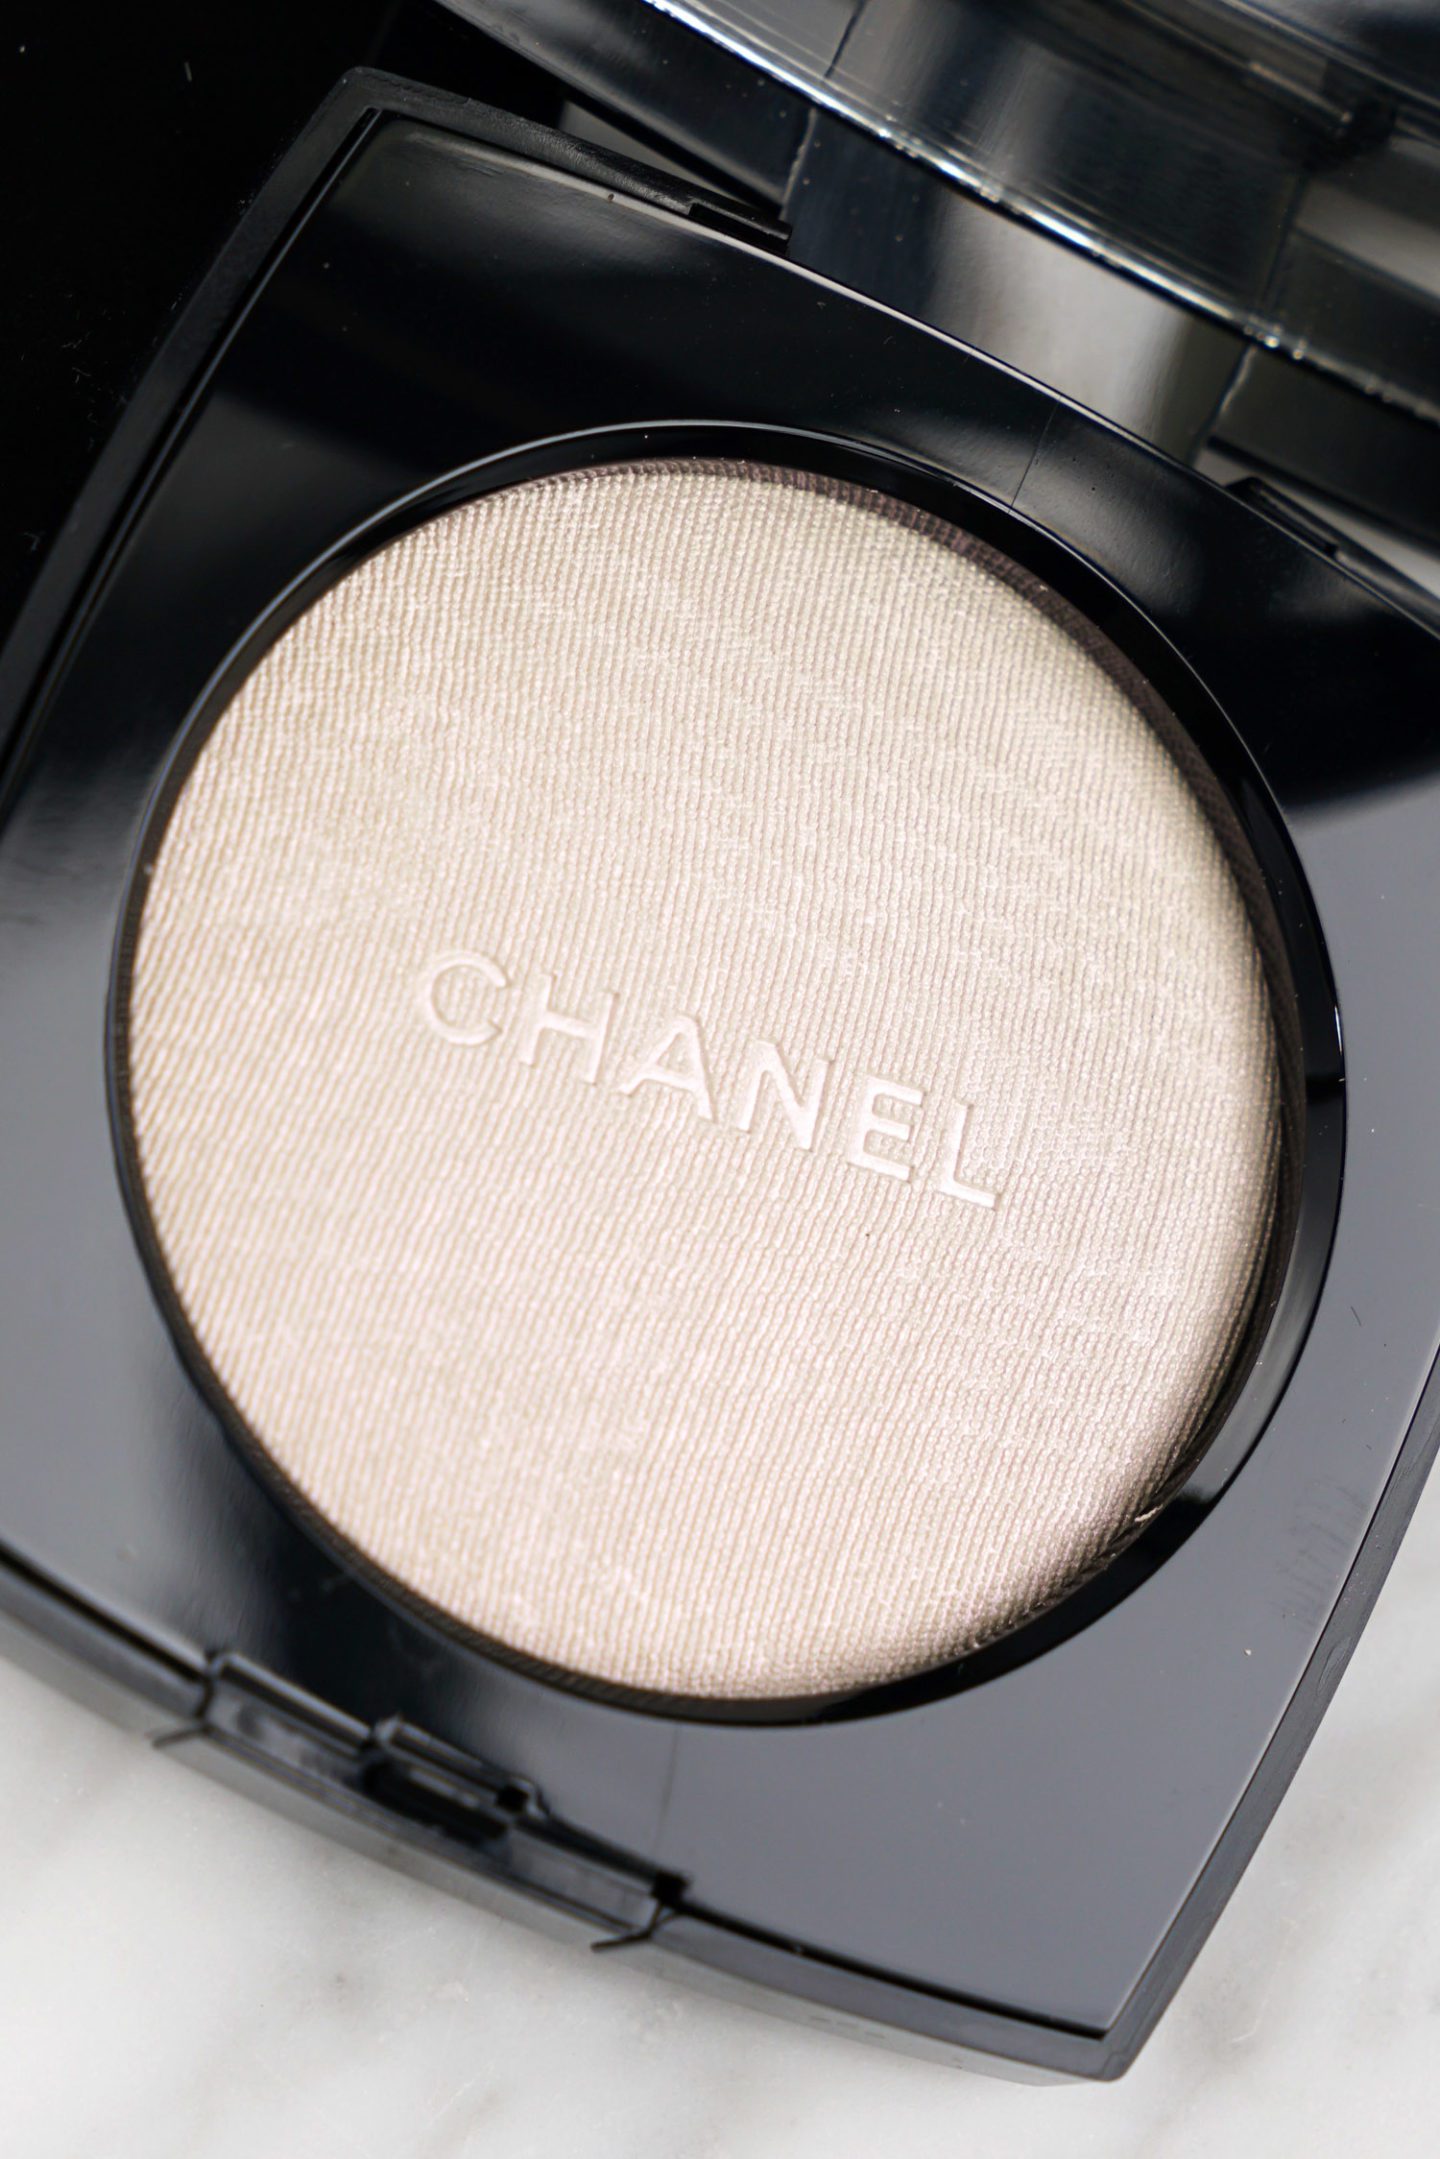 Chanel Poudre Lumiere in White Opal